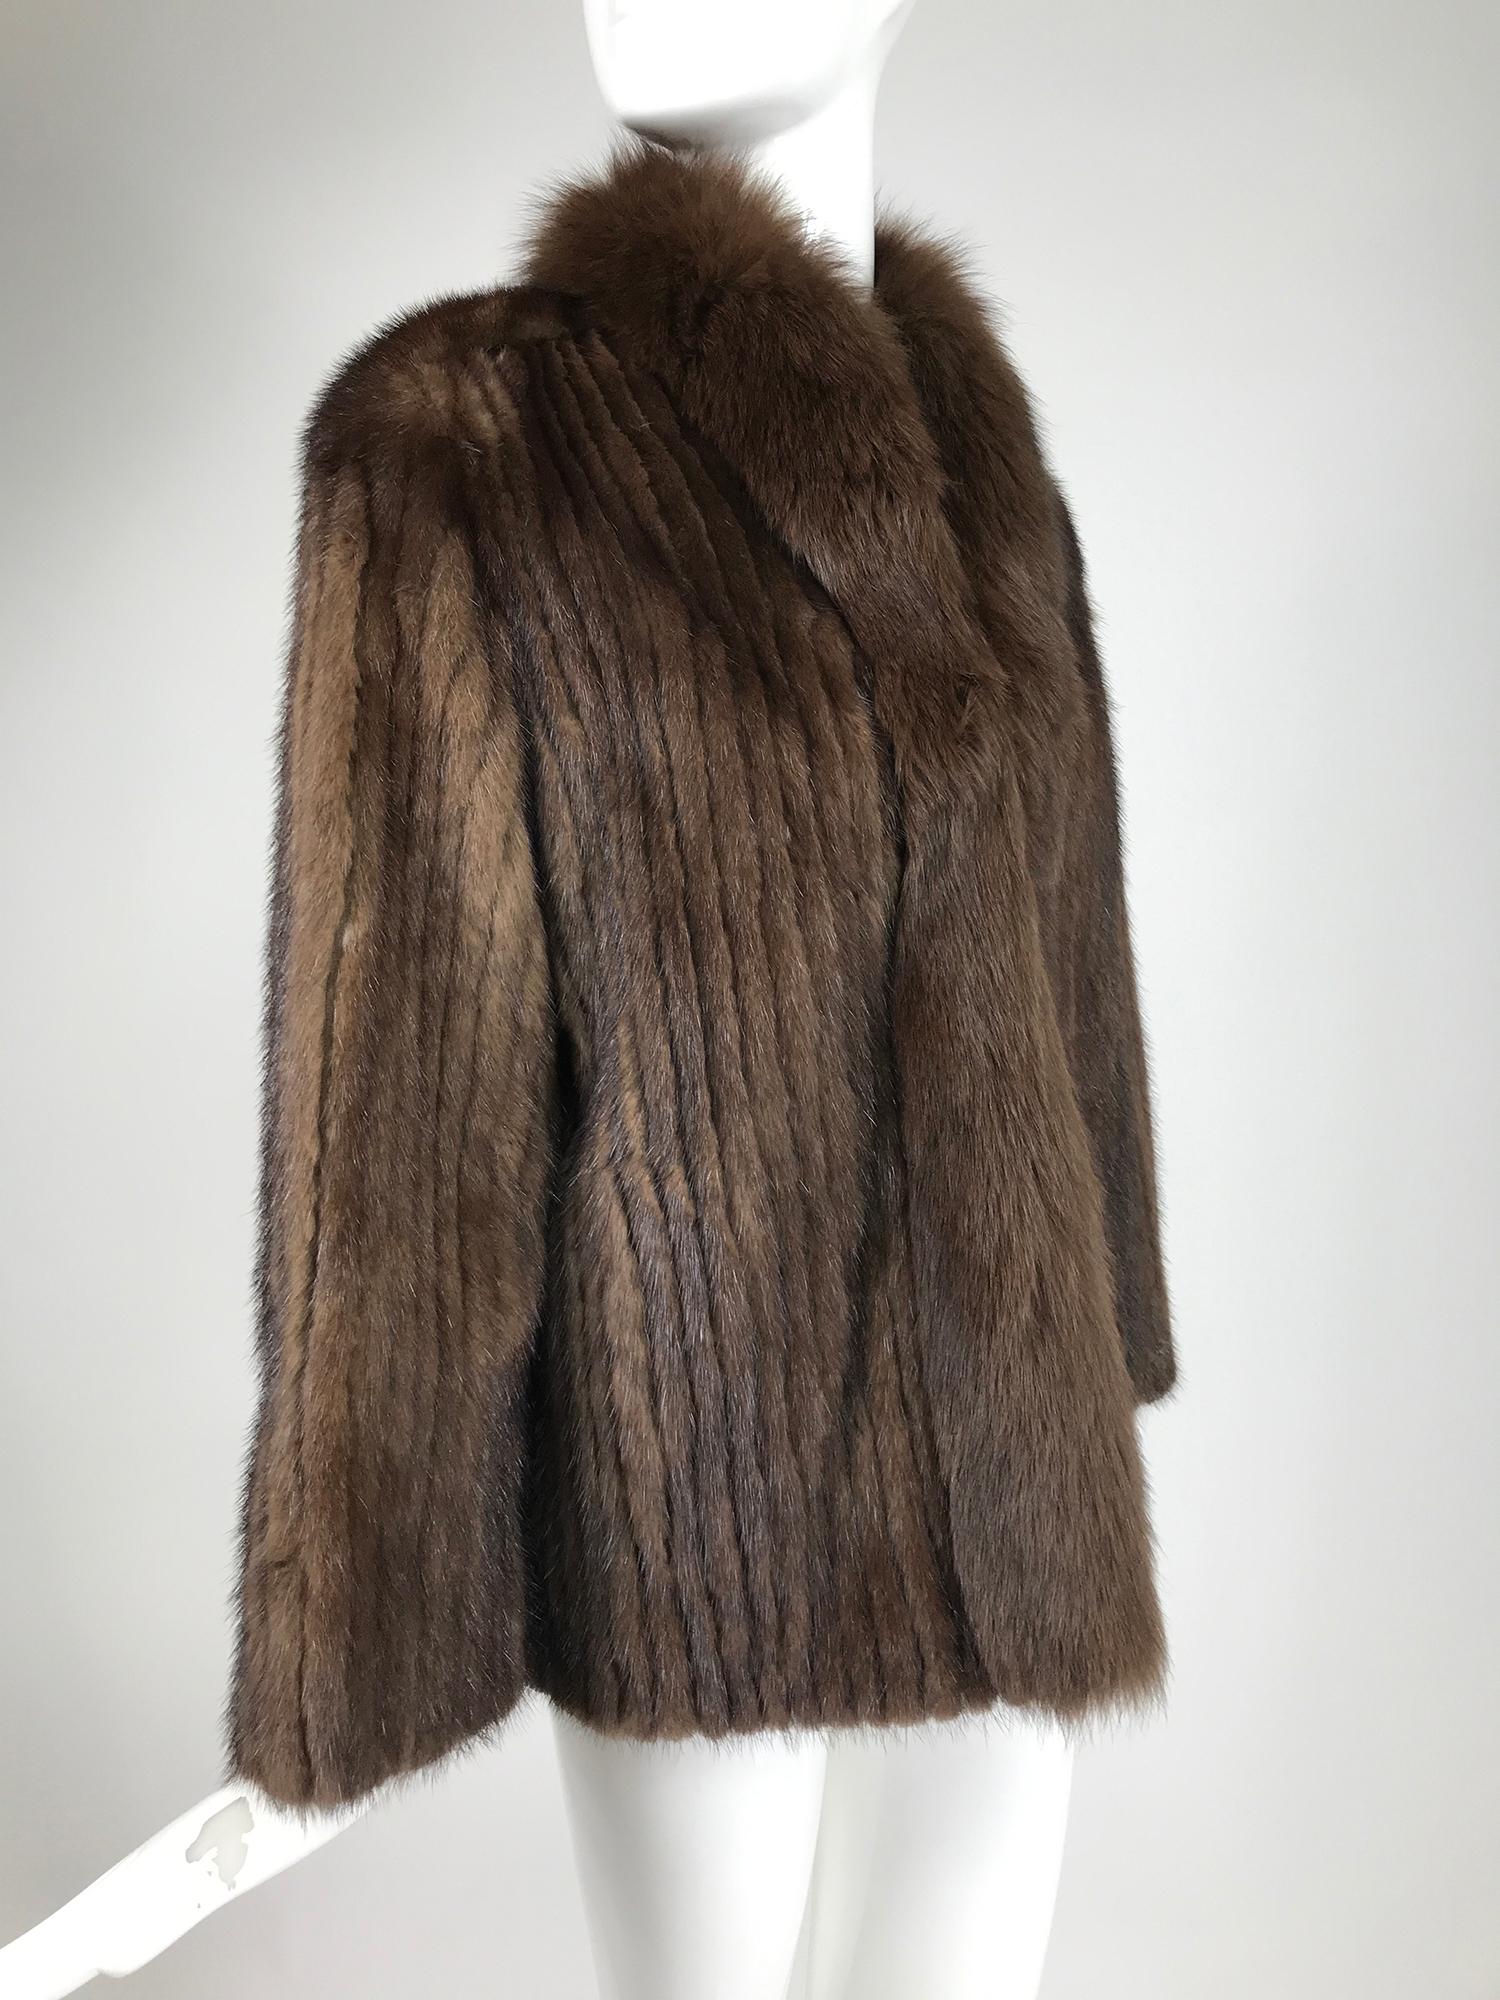 SAGA Chestnut Mink Jacket with Fox Fur Collar & Facing In Good Condition For Sale In West Palm Beach, FL